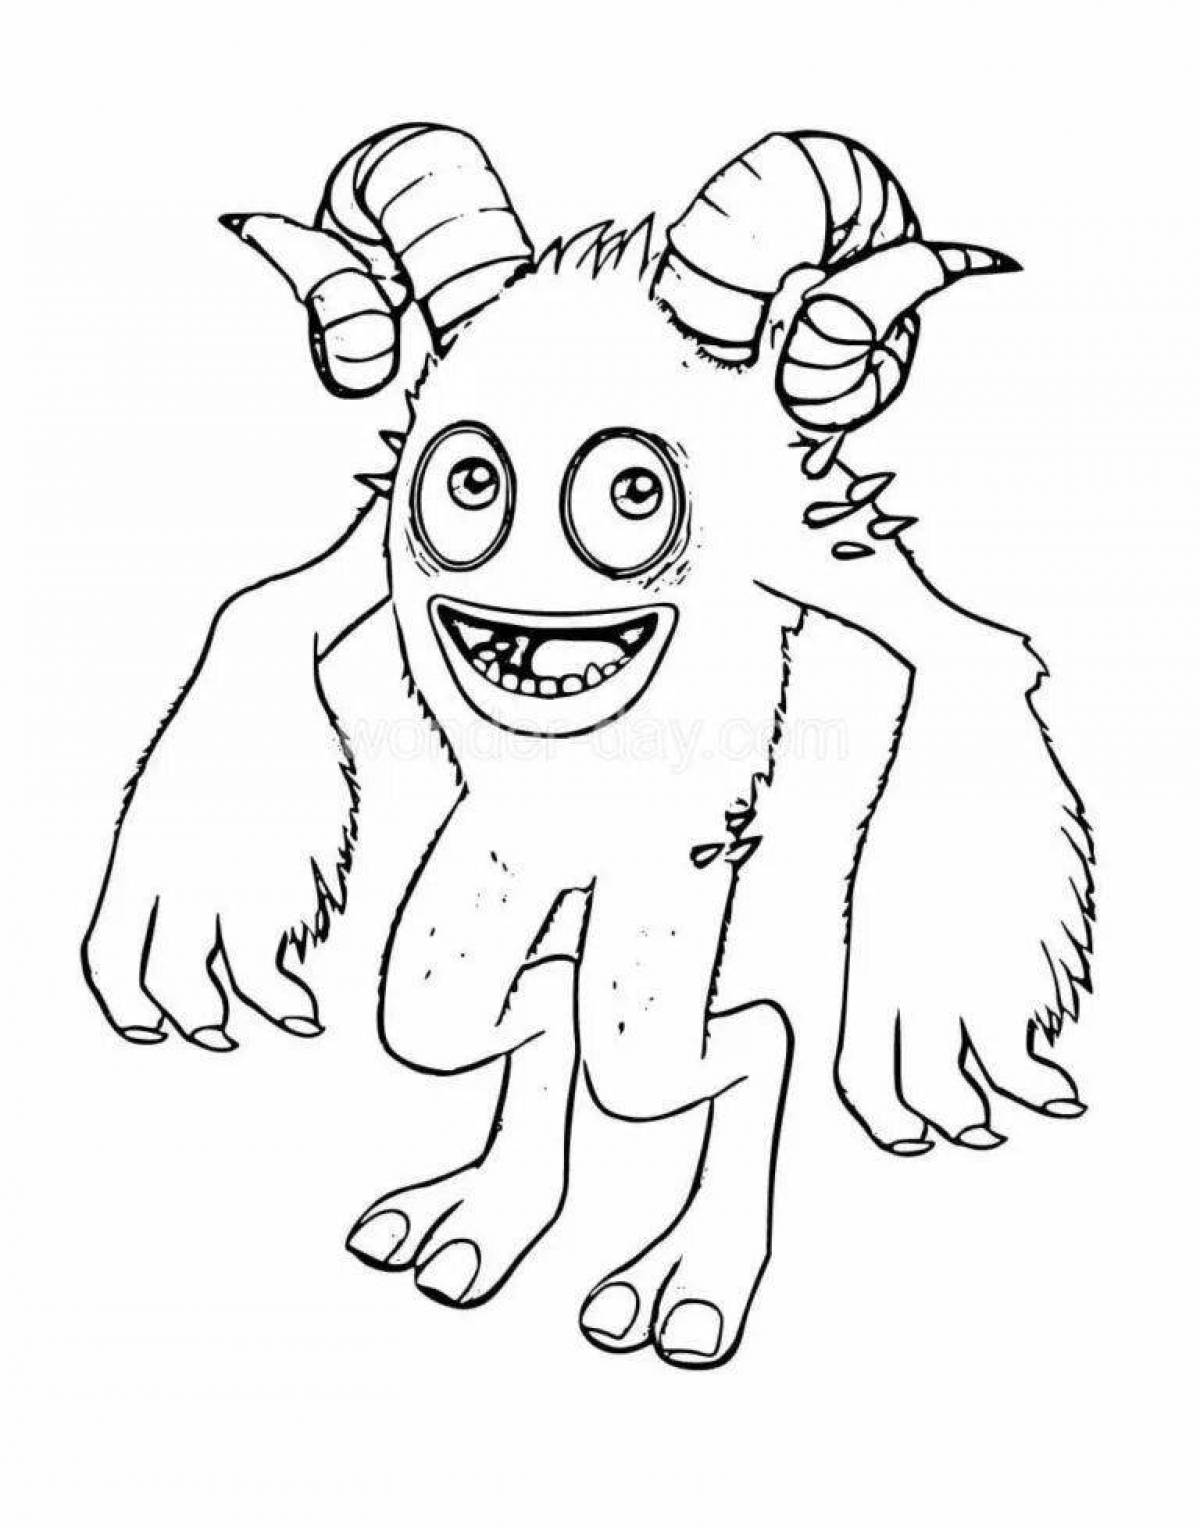 Funny singing monsters coloring pages for kids